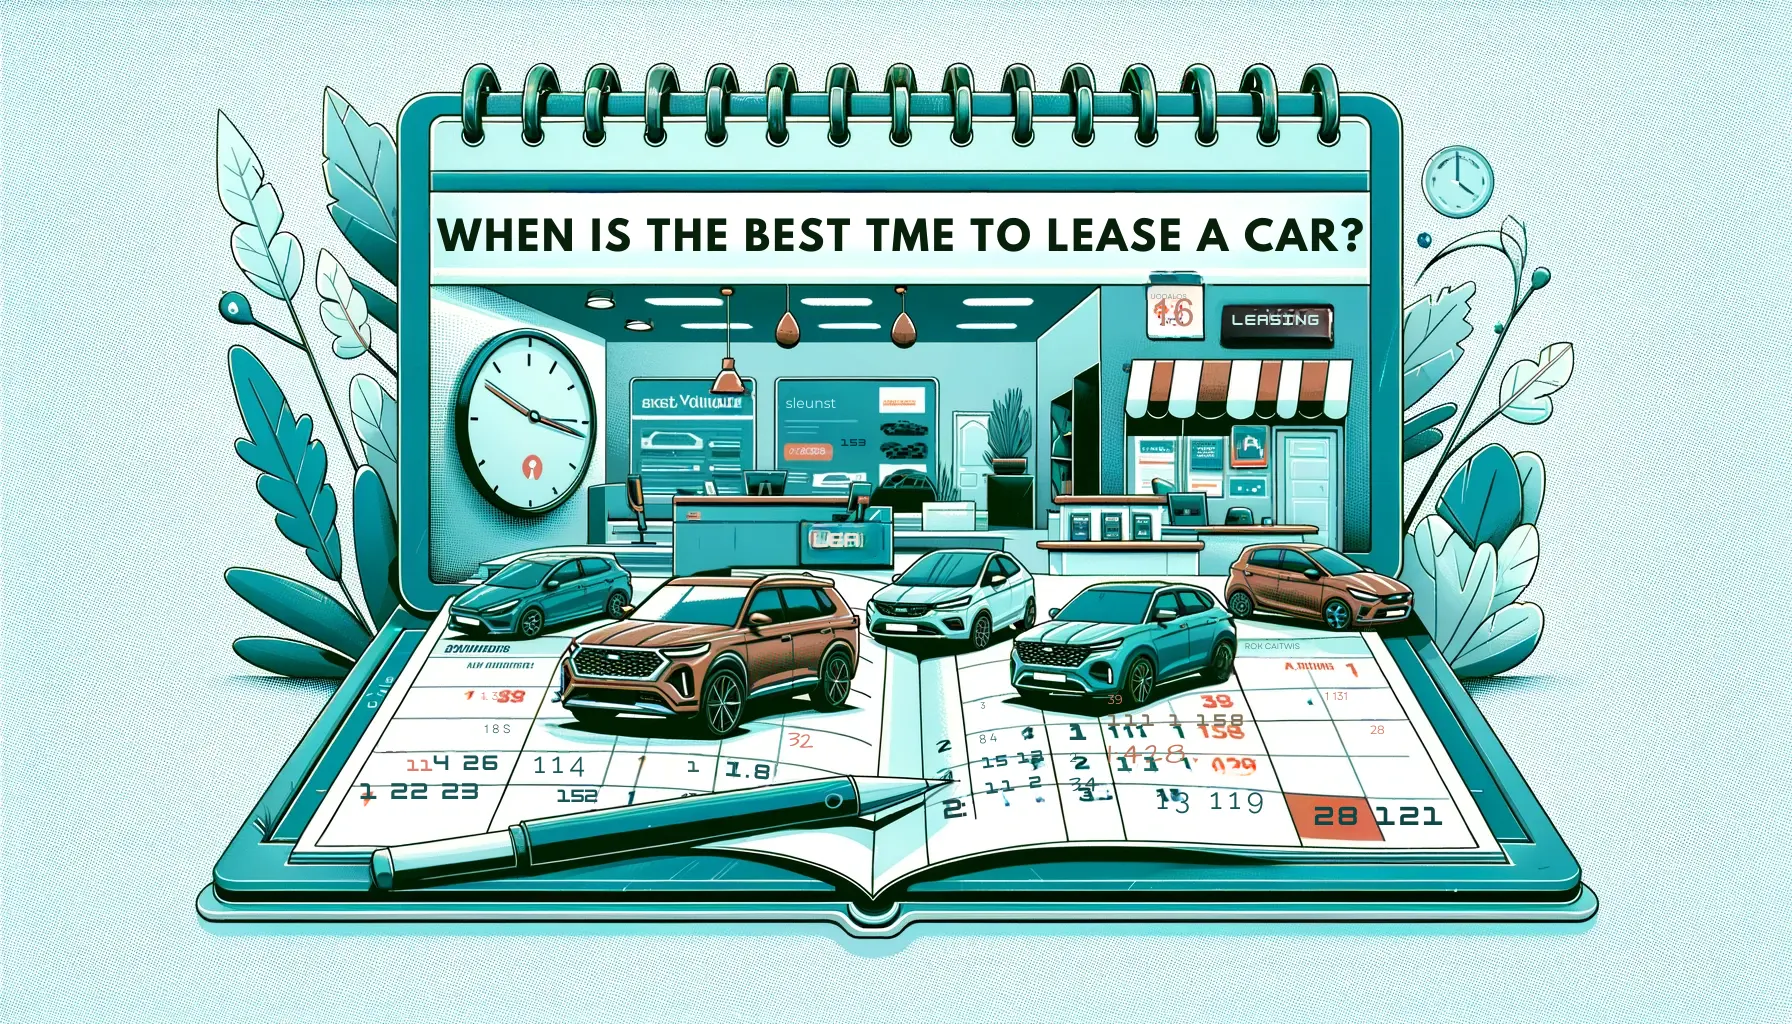 When is the Best Time to Lease a Car? Suggest Wise